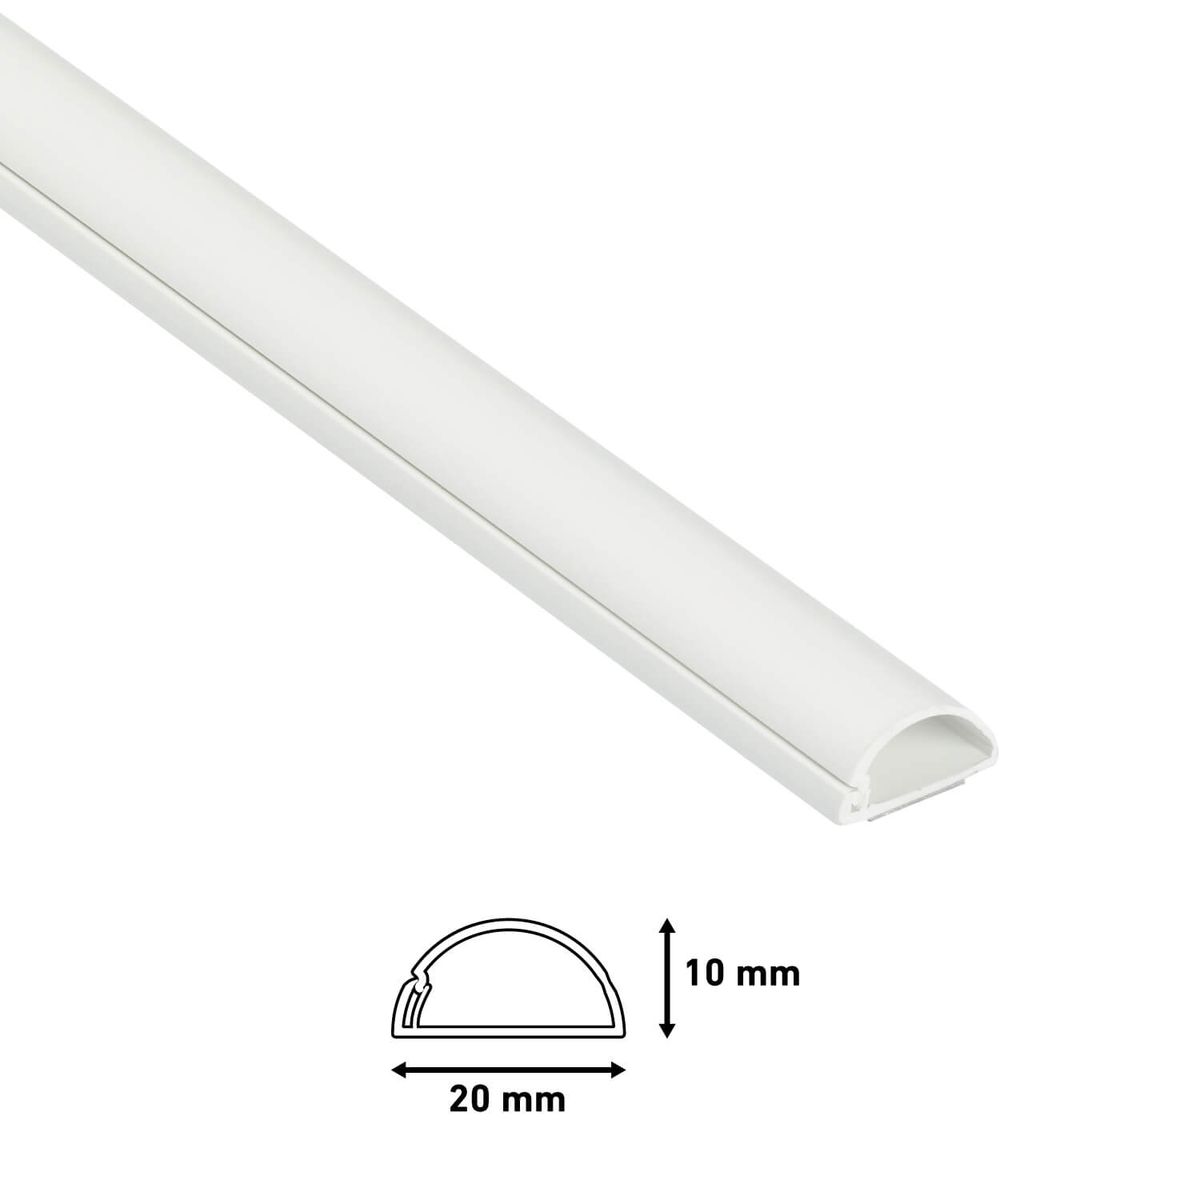 D-Line Half Round Micro Cable Trunking / ducting 20mm x 10mm x 2m white